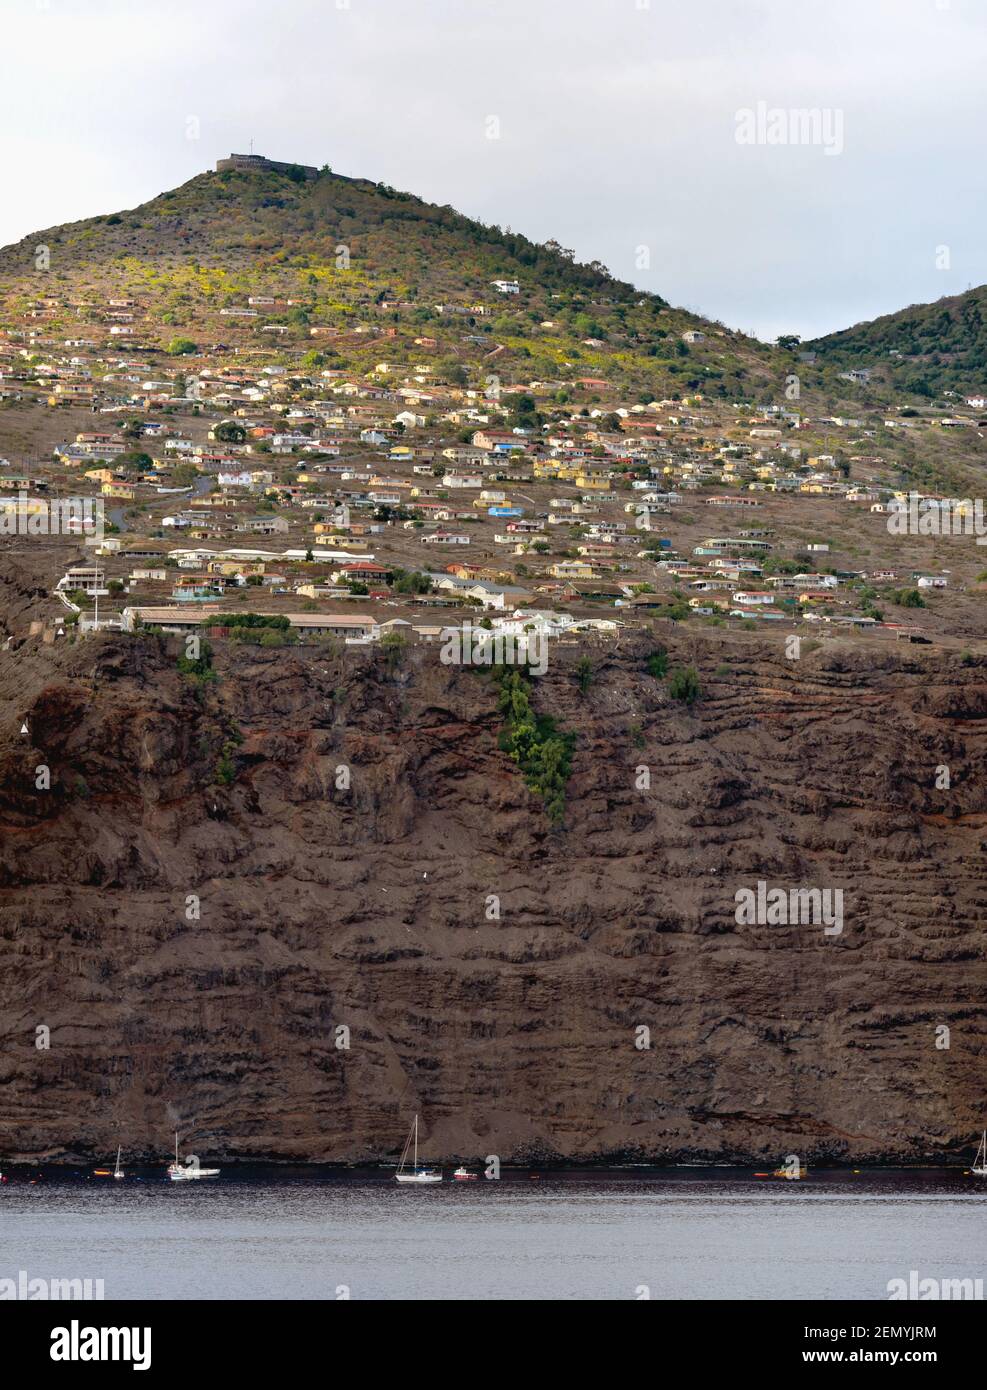 Village at the Edge of a Cliff on Saint Helena Island Stock Photo